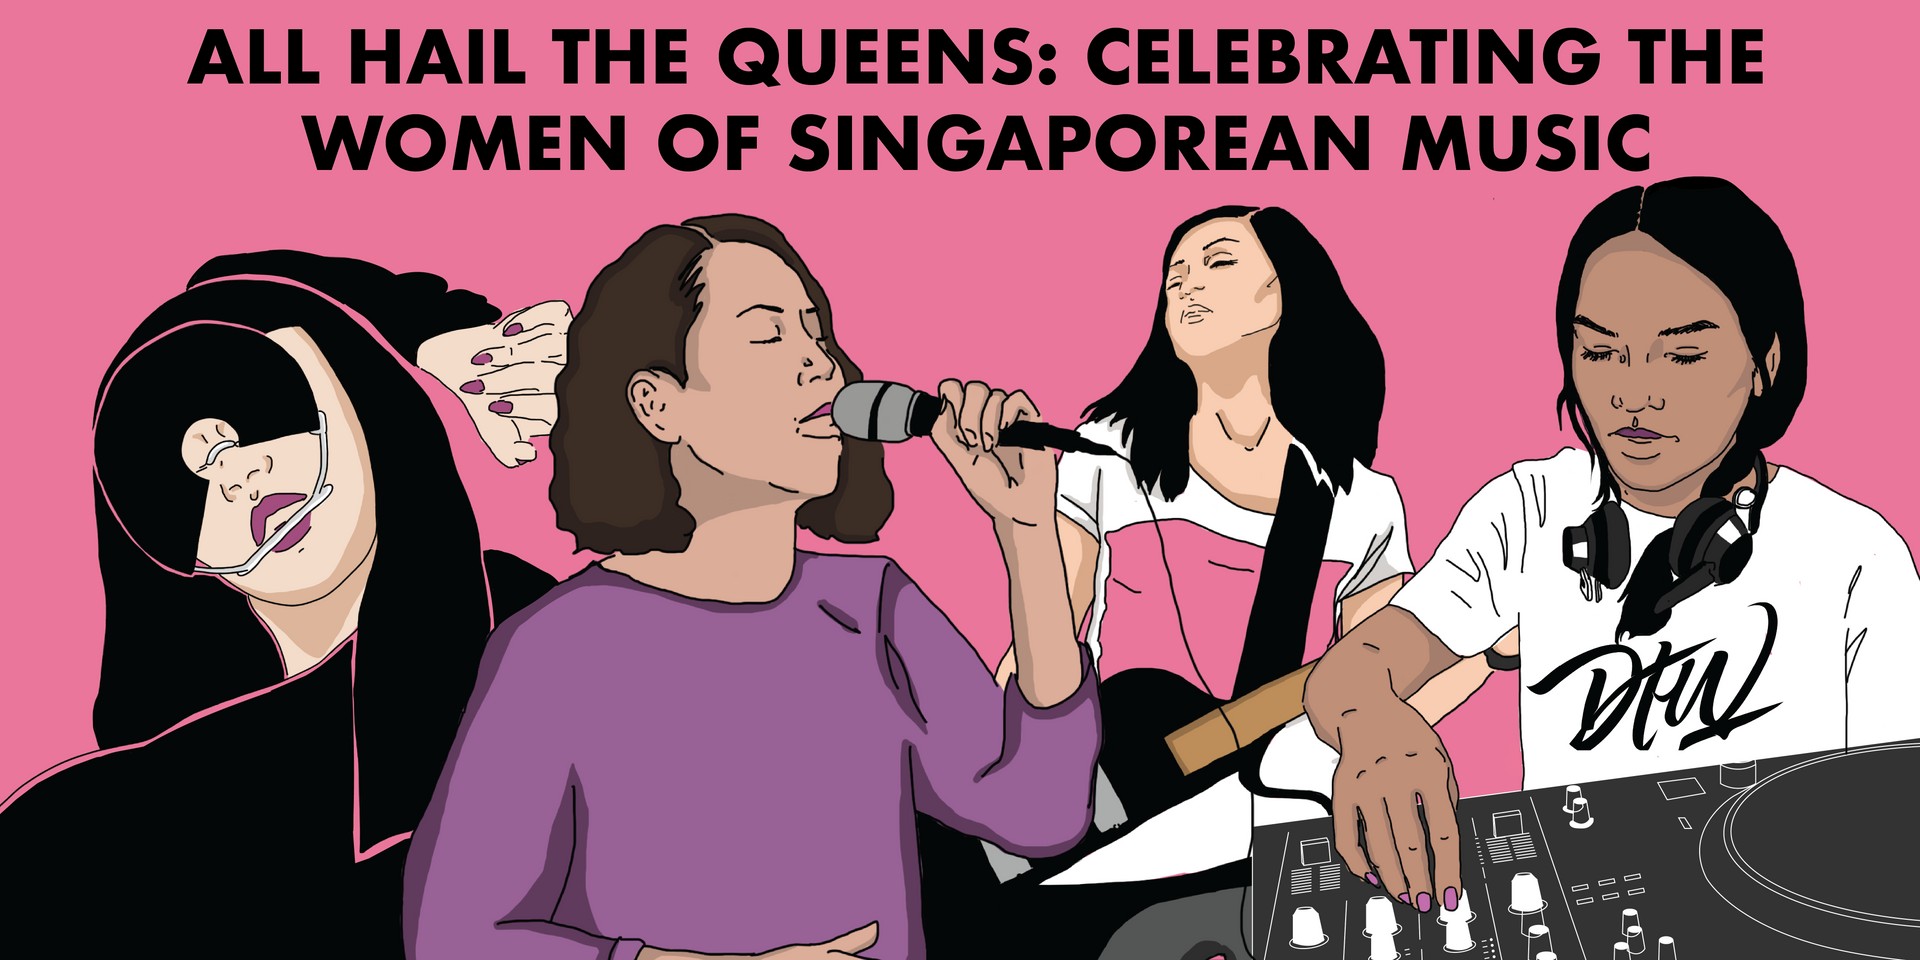 All Hail the Queens: Celebrating the women of Singaporean music